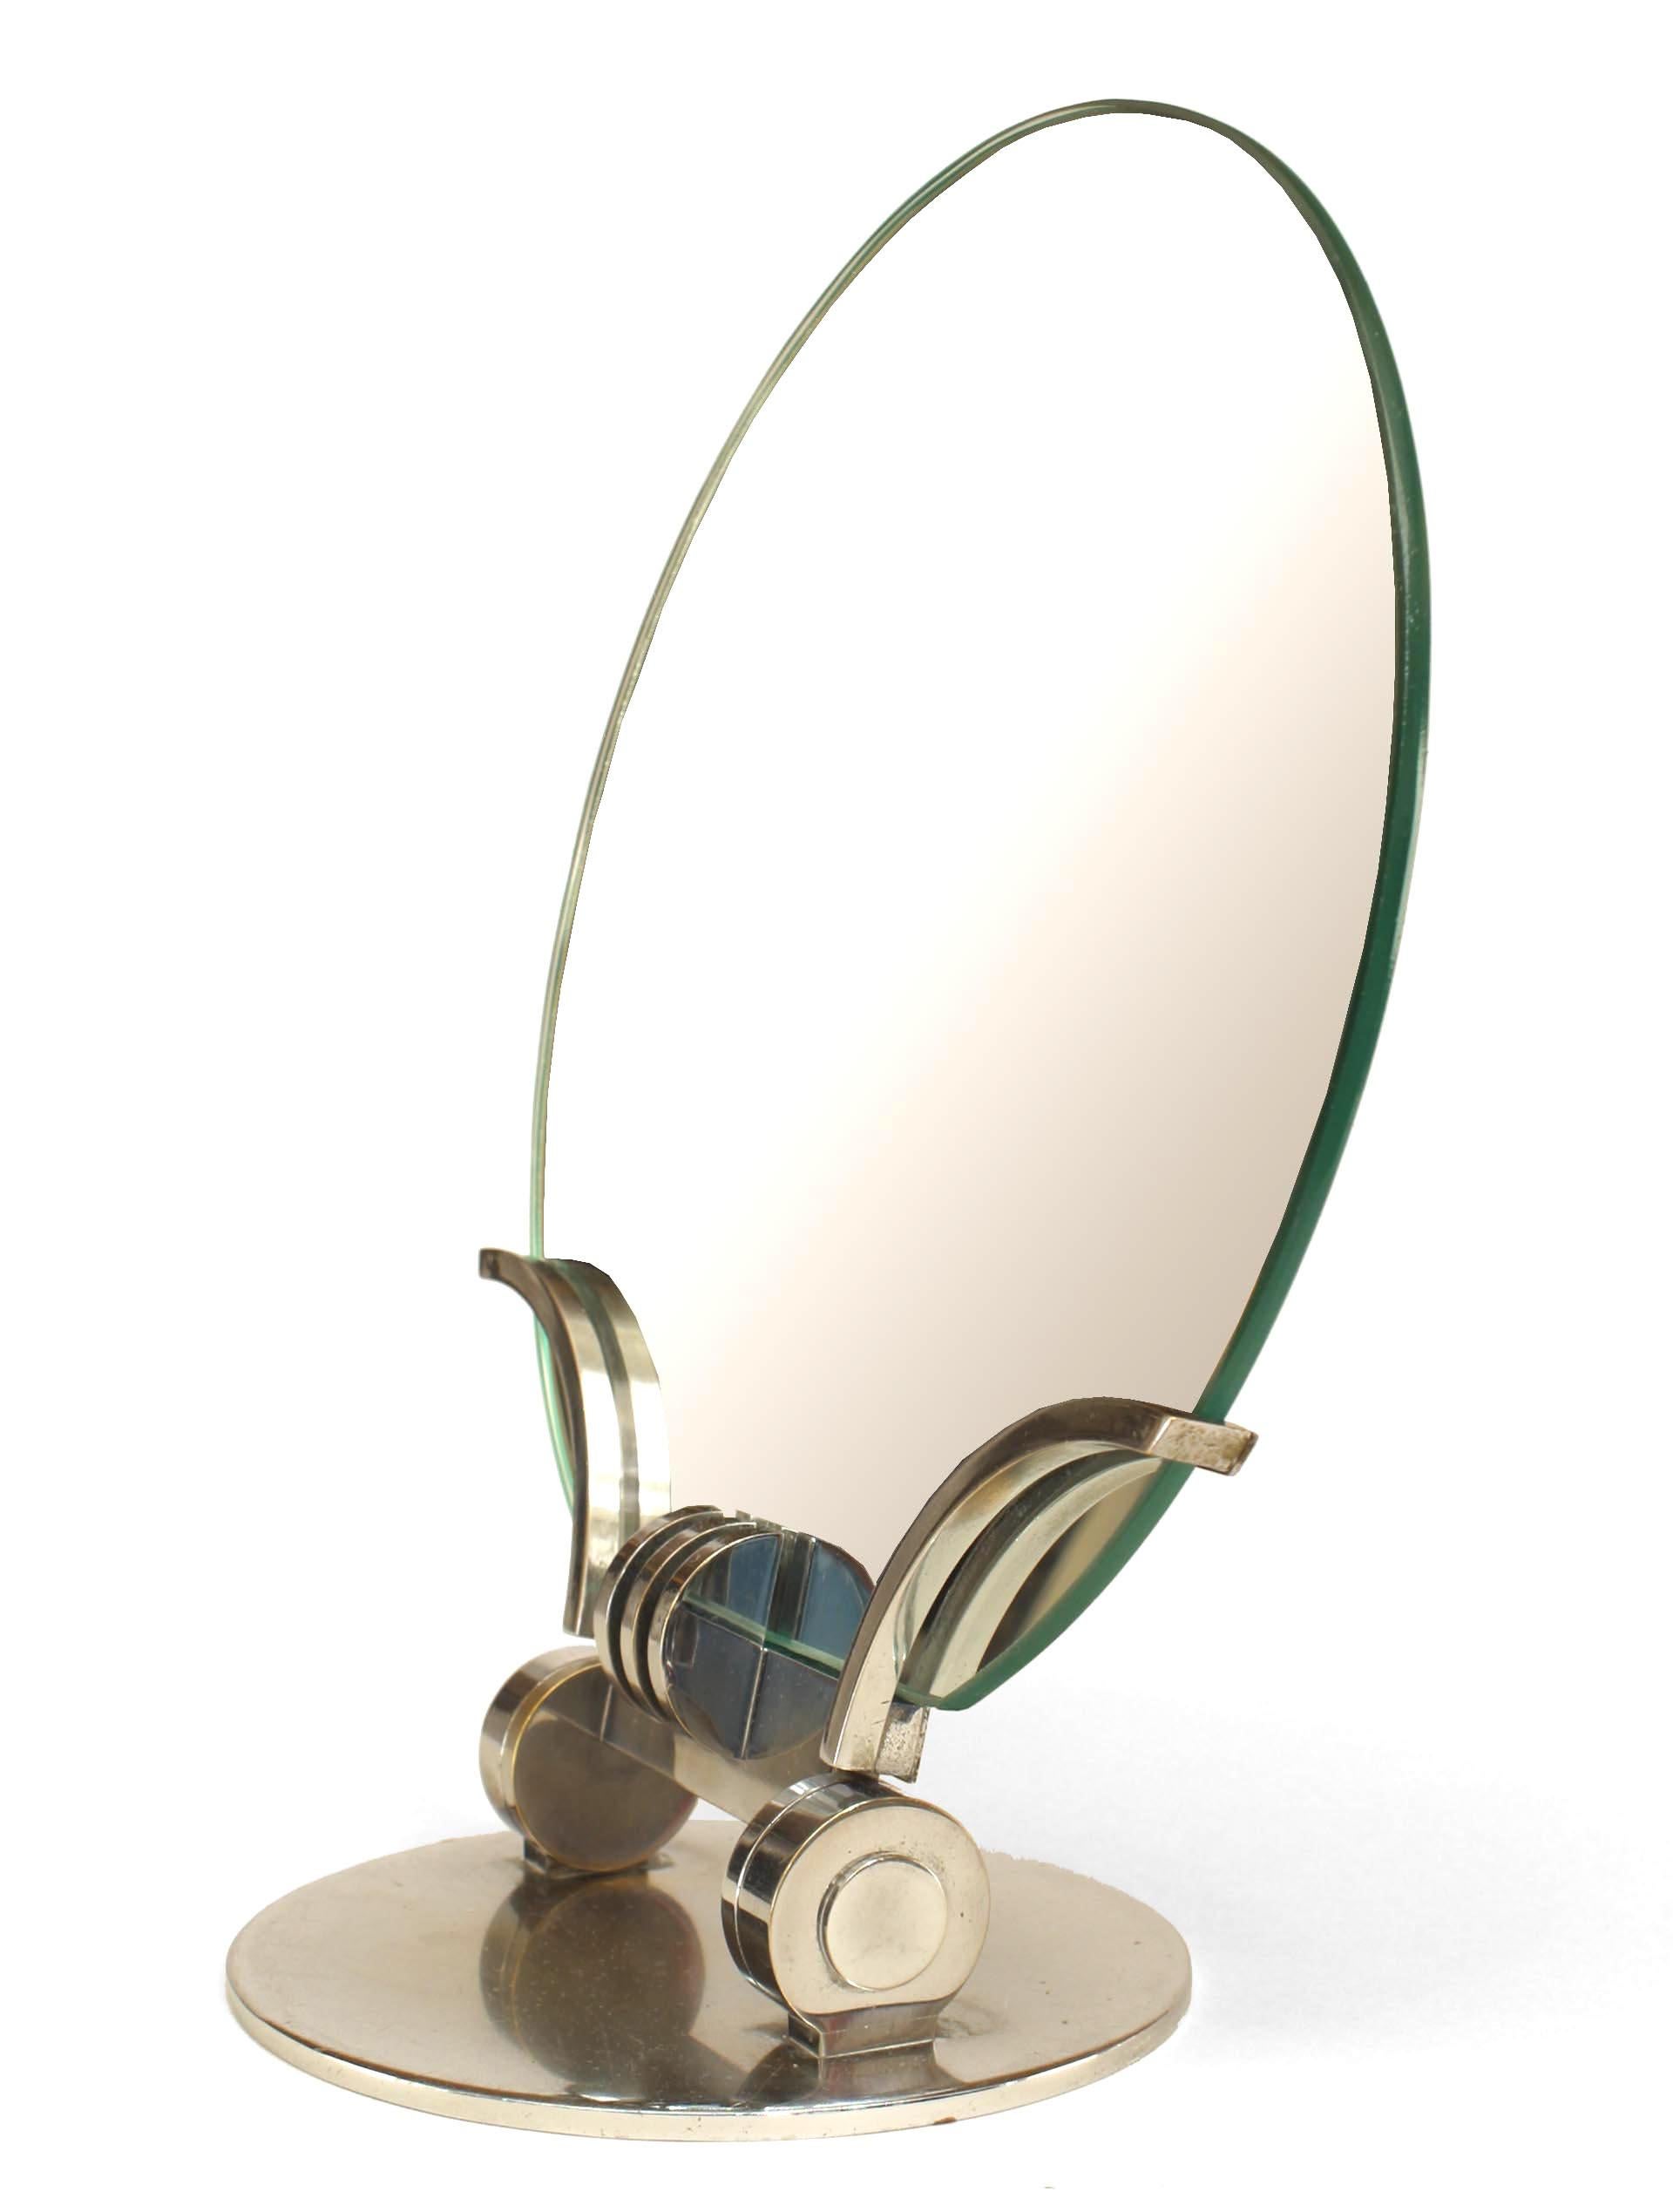 French Art Deco chrome plated dressing table mirror characterized by a piece of round, frameless mirrored glass positioned above a smaller round chrome base with a stylish adjustable stand composed of the same material.